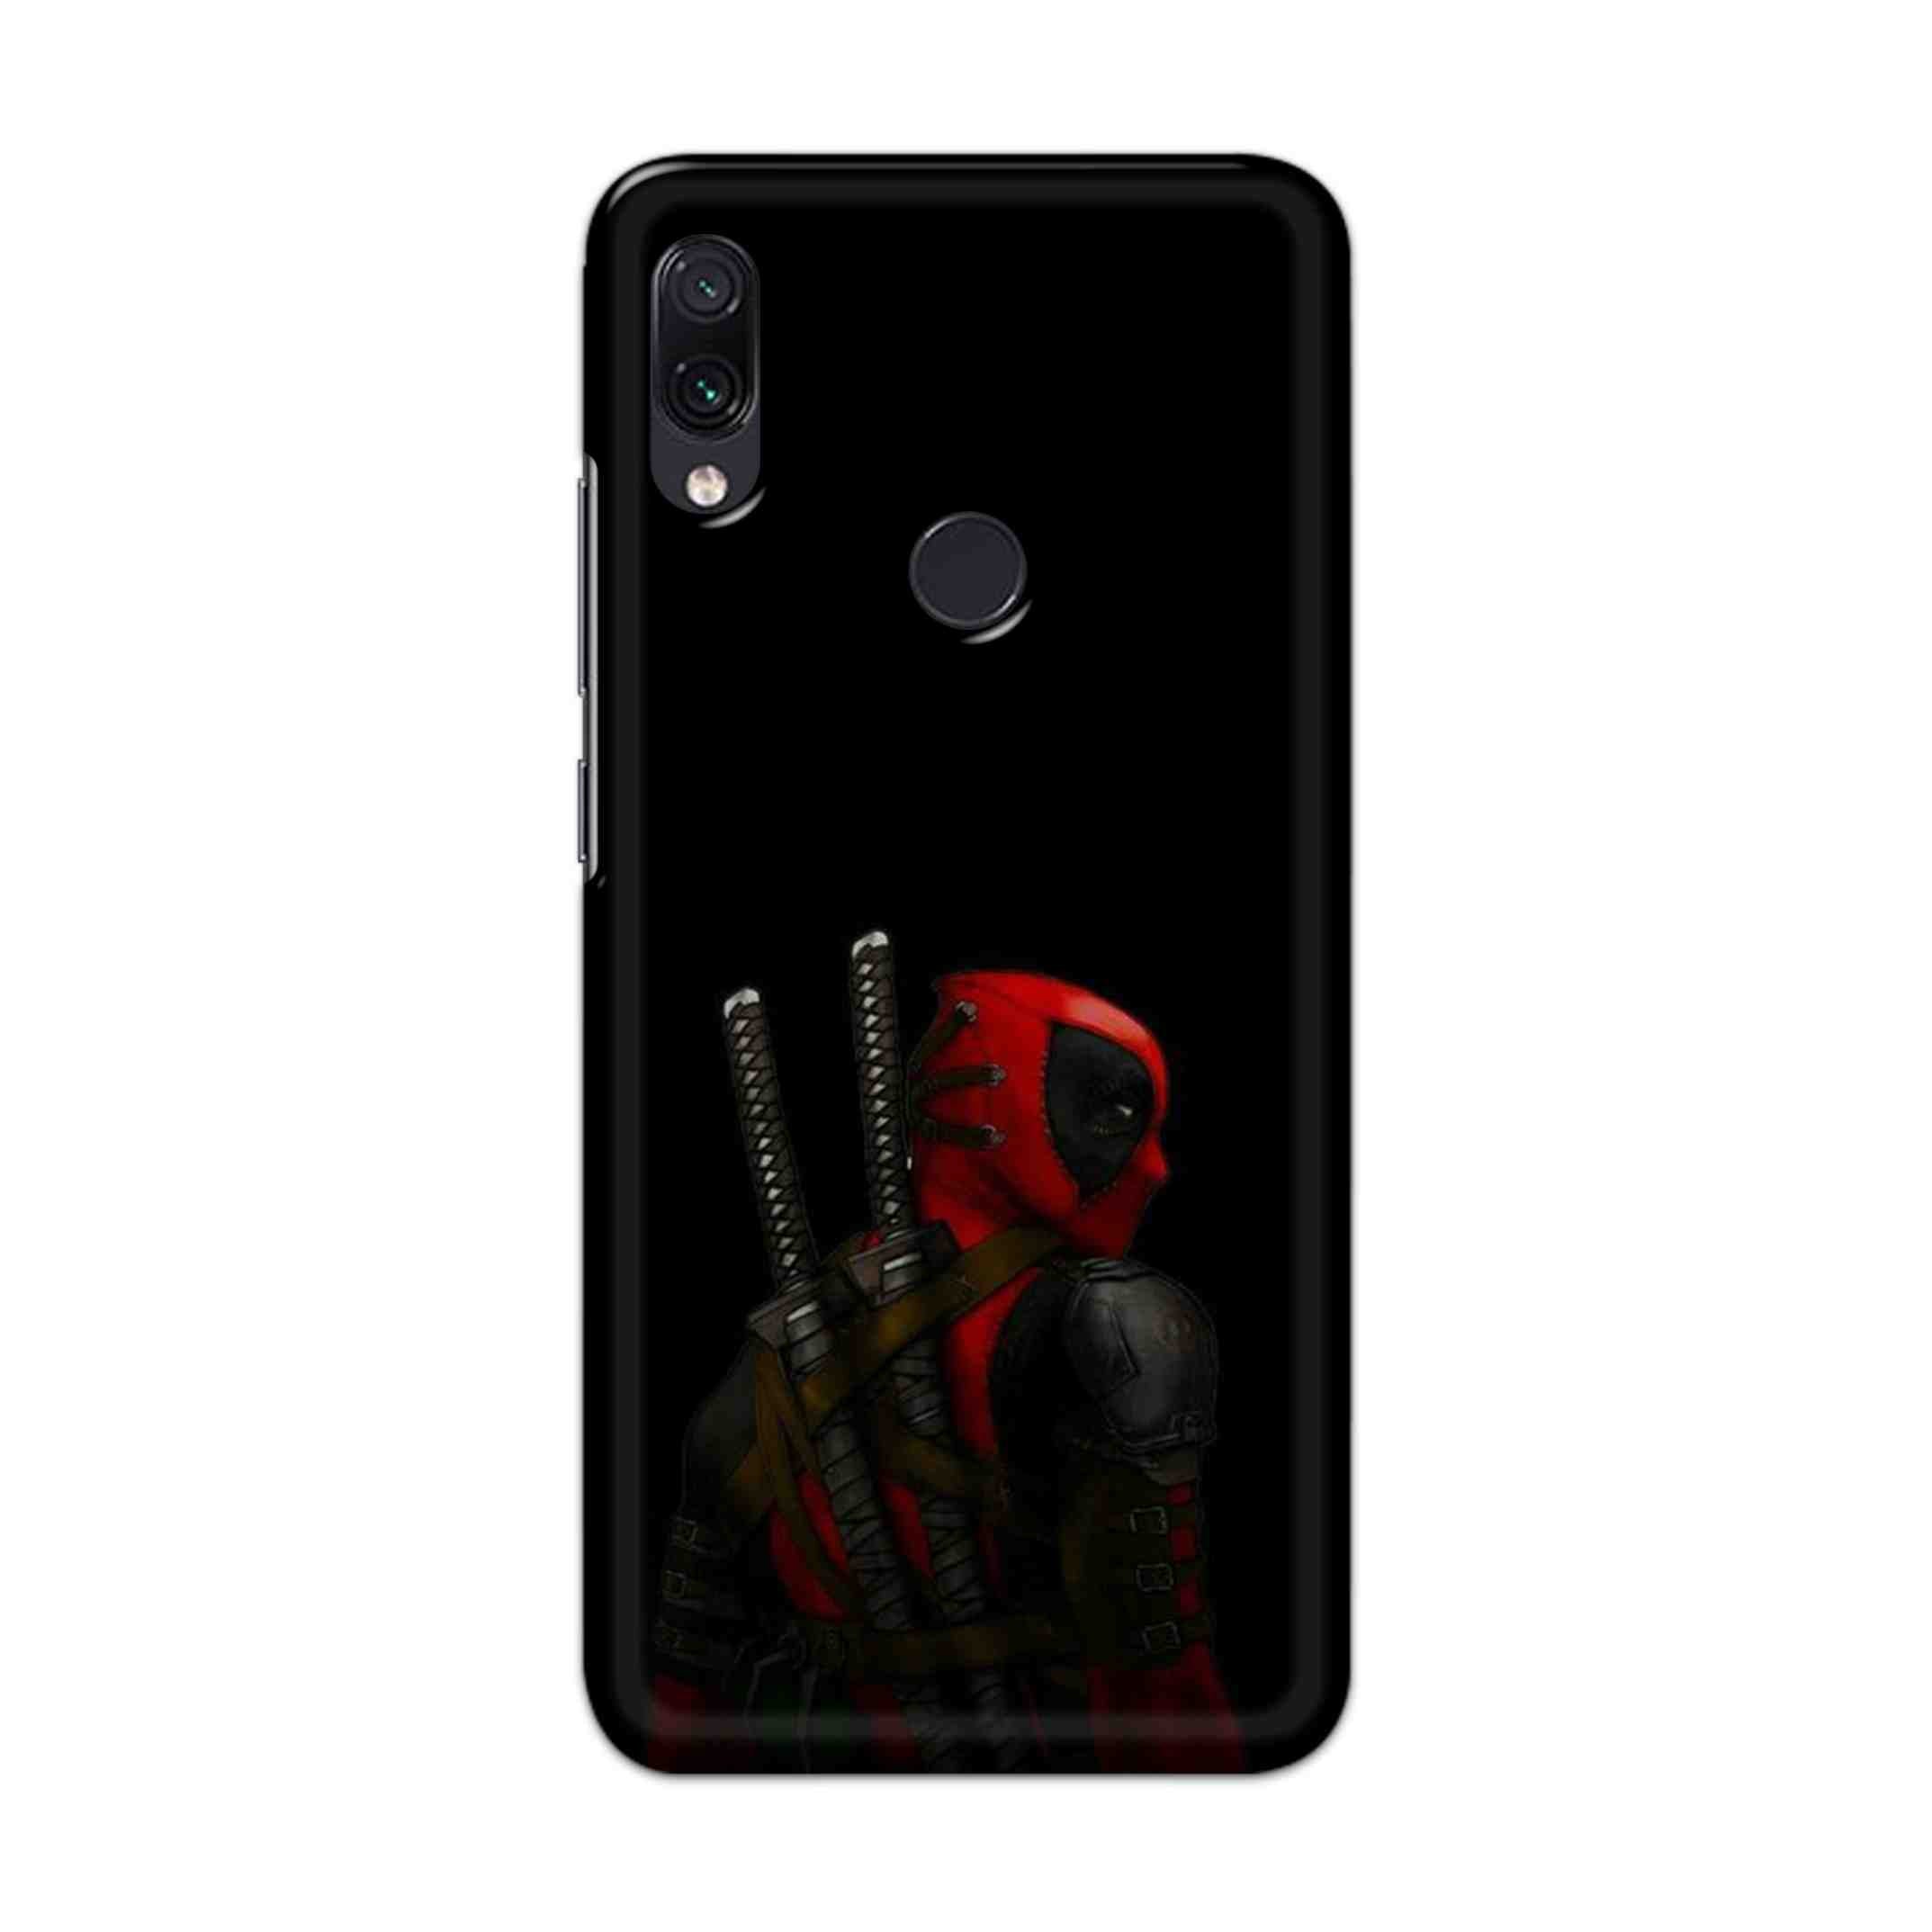 Buy Deadpool Hard Back Mobile Phone Case Cover For Redmi Note 7 / Note 7 Pro Online